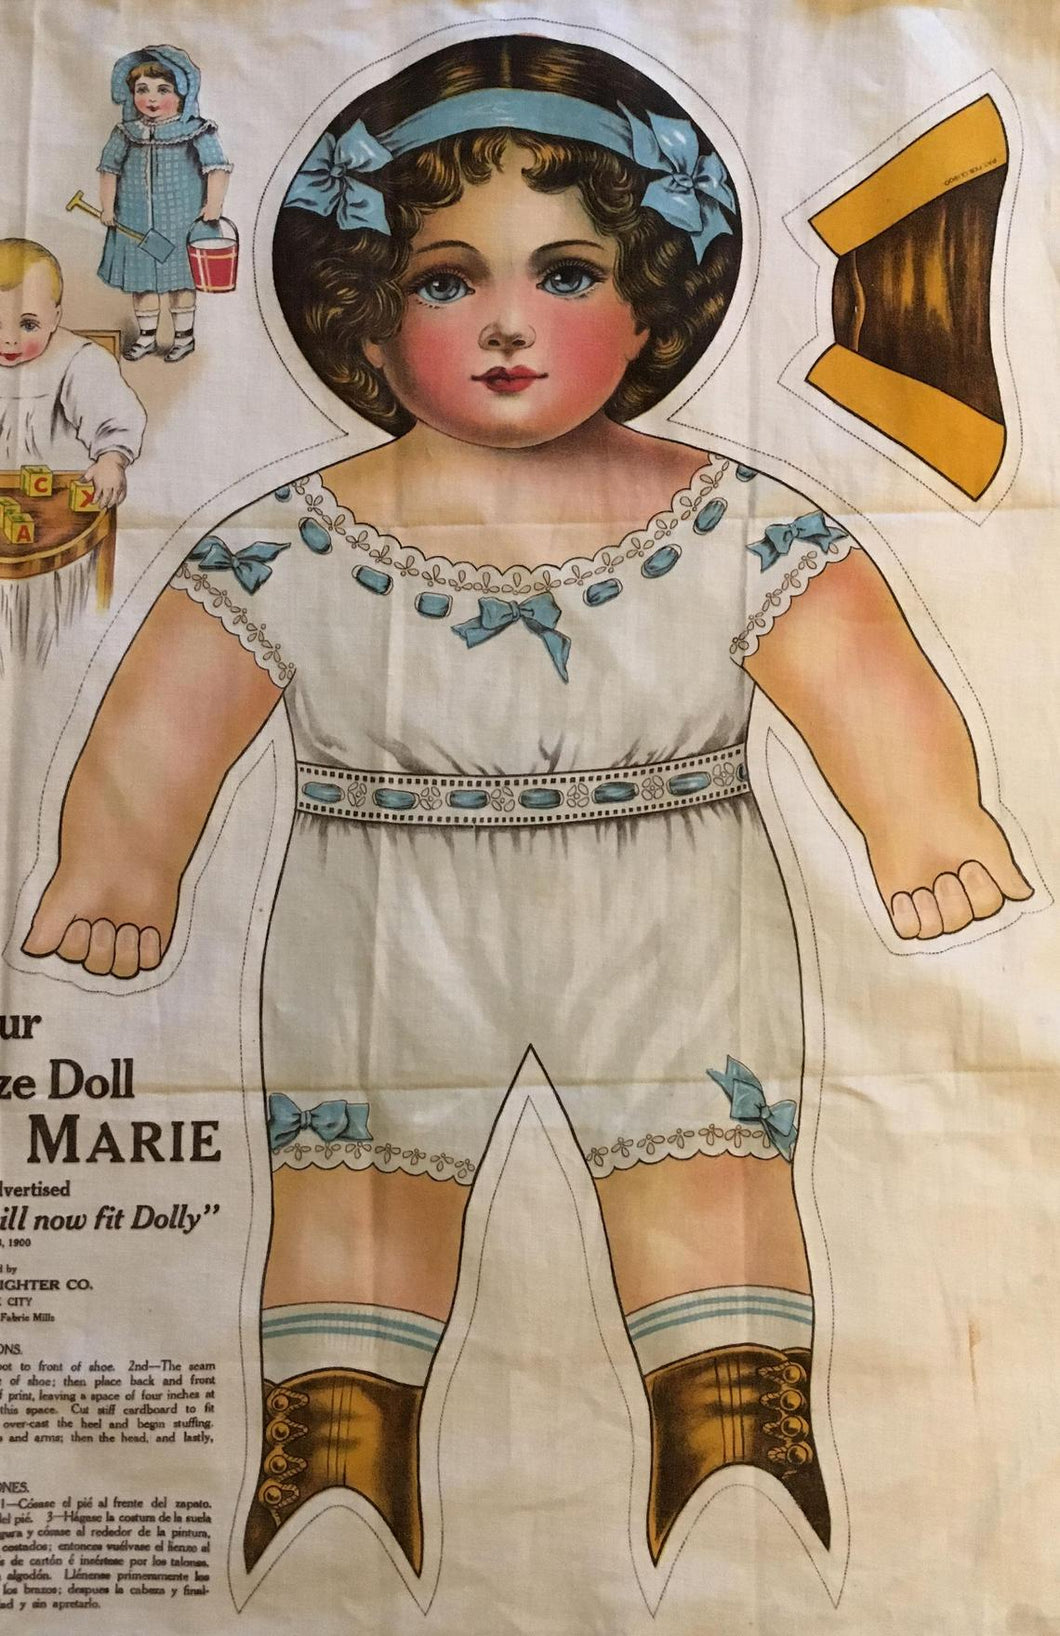 Vintage Merrie Marie Cloth Doll Panel -  Selchow & Righter Co. Life Size Cut and Sew Rag Doll - Early 1900